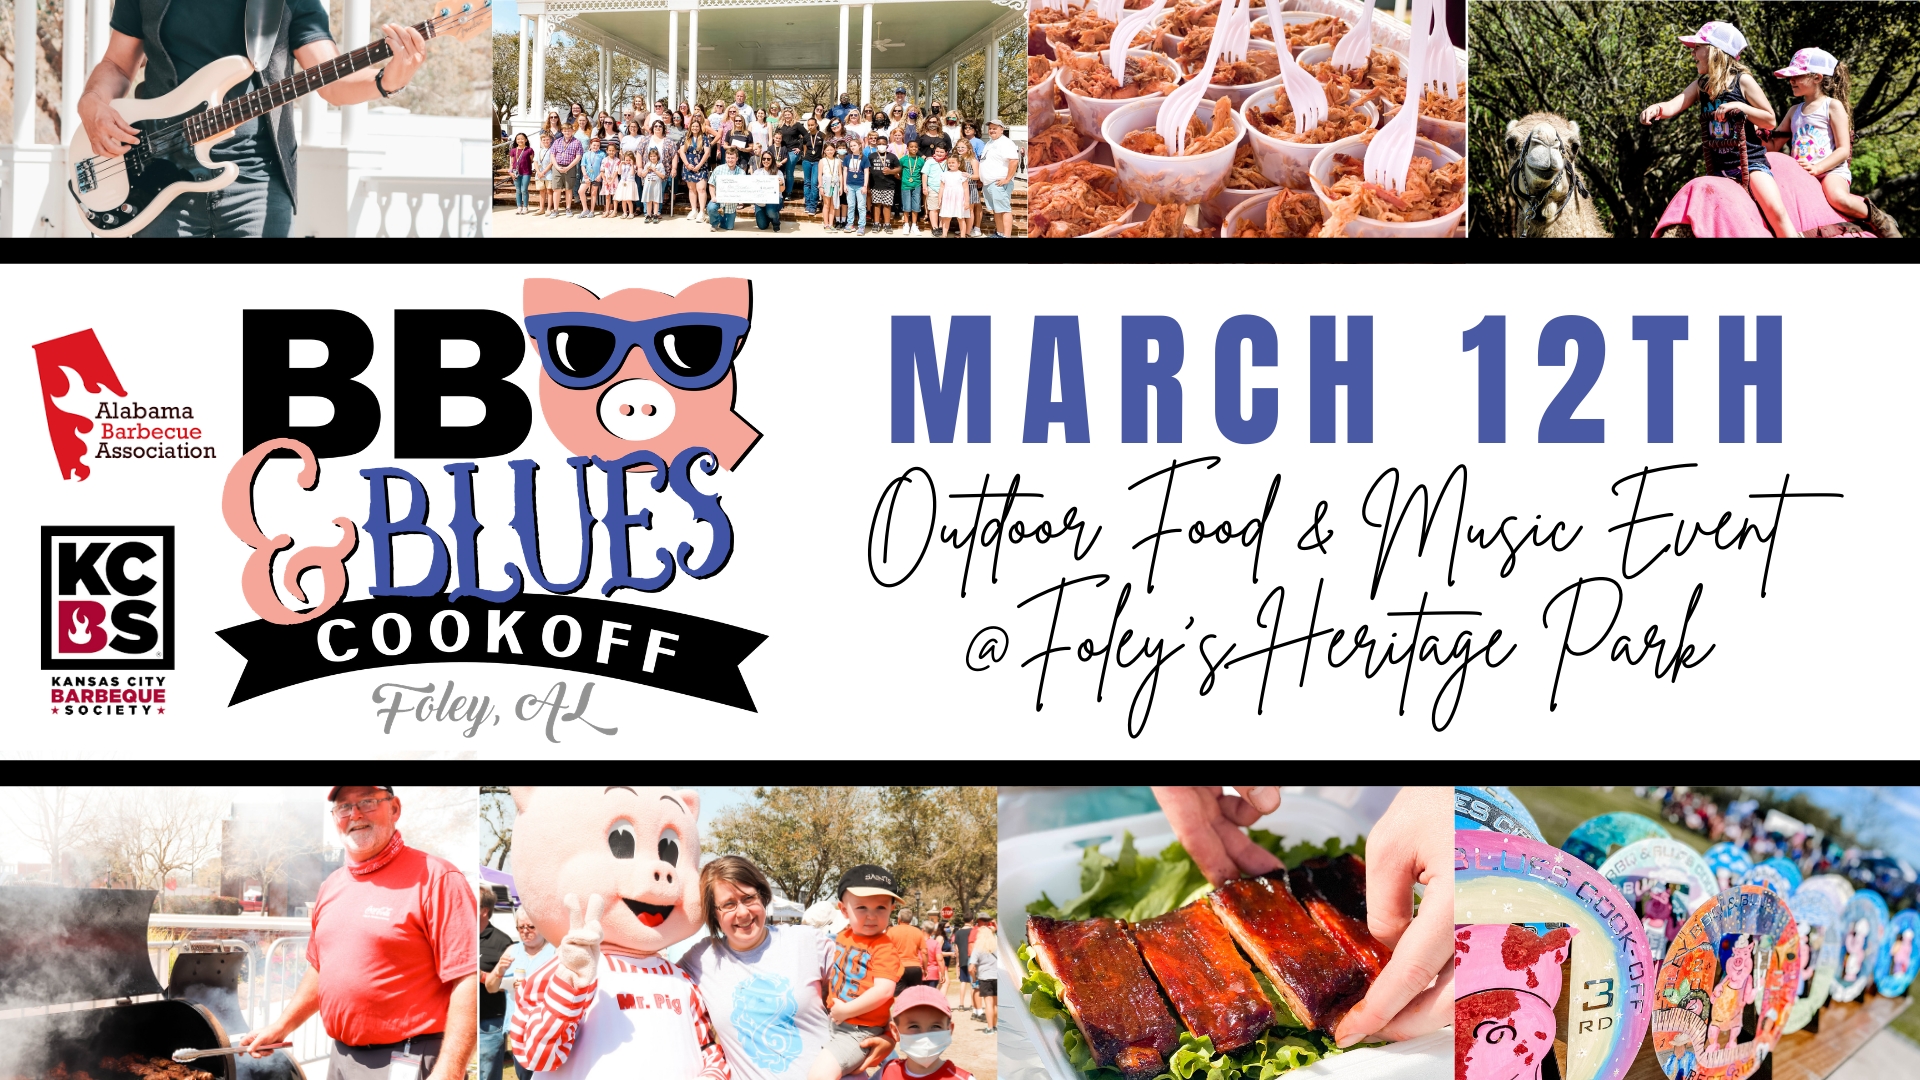 14th Annual BBQ and Blues Cook Off